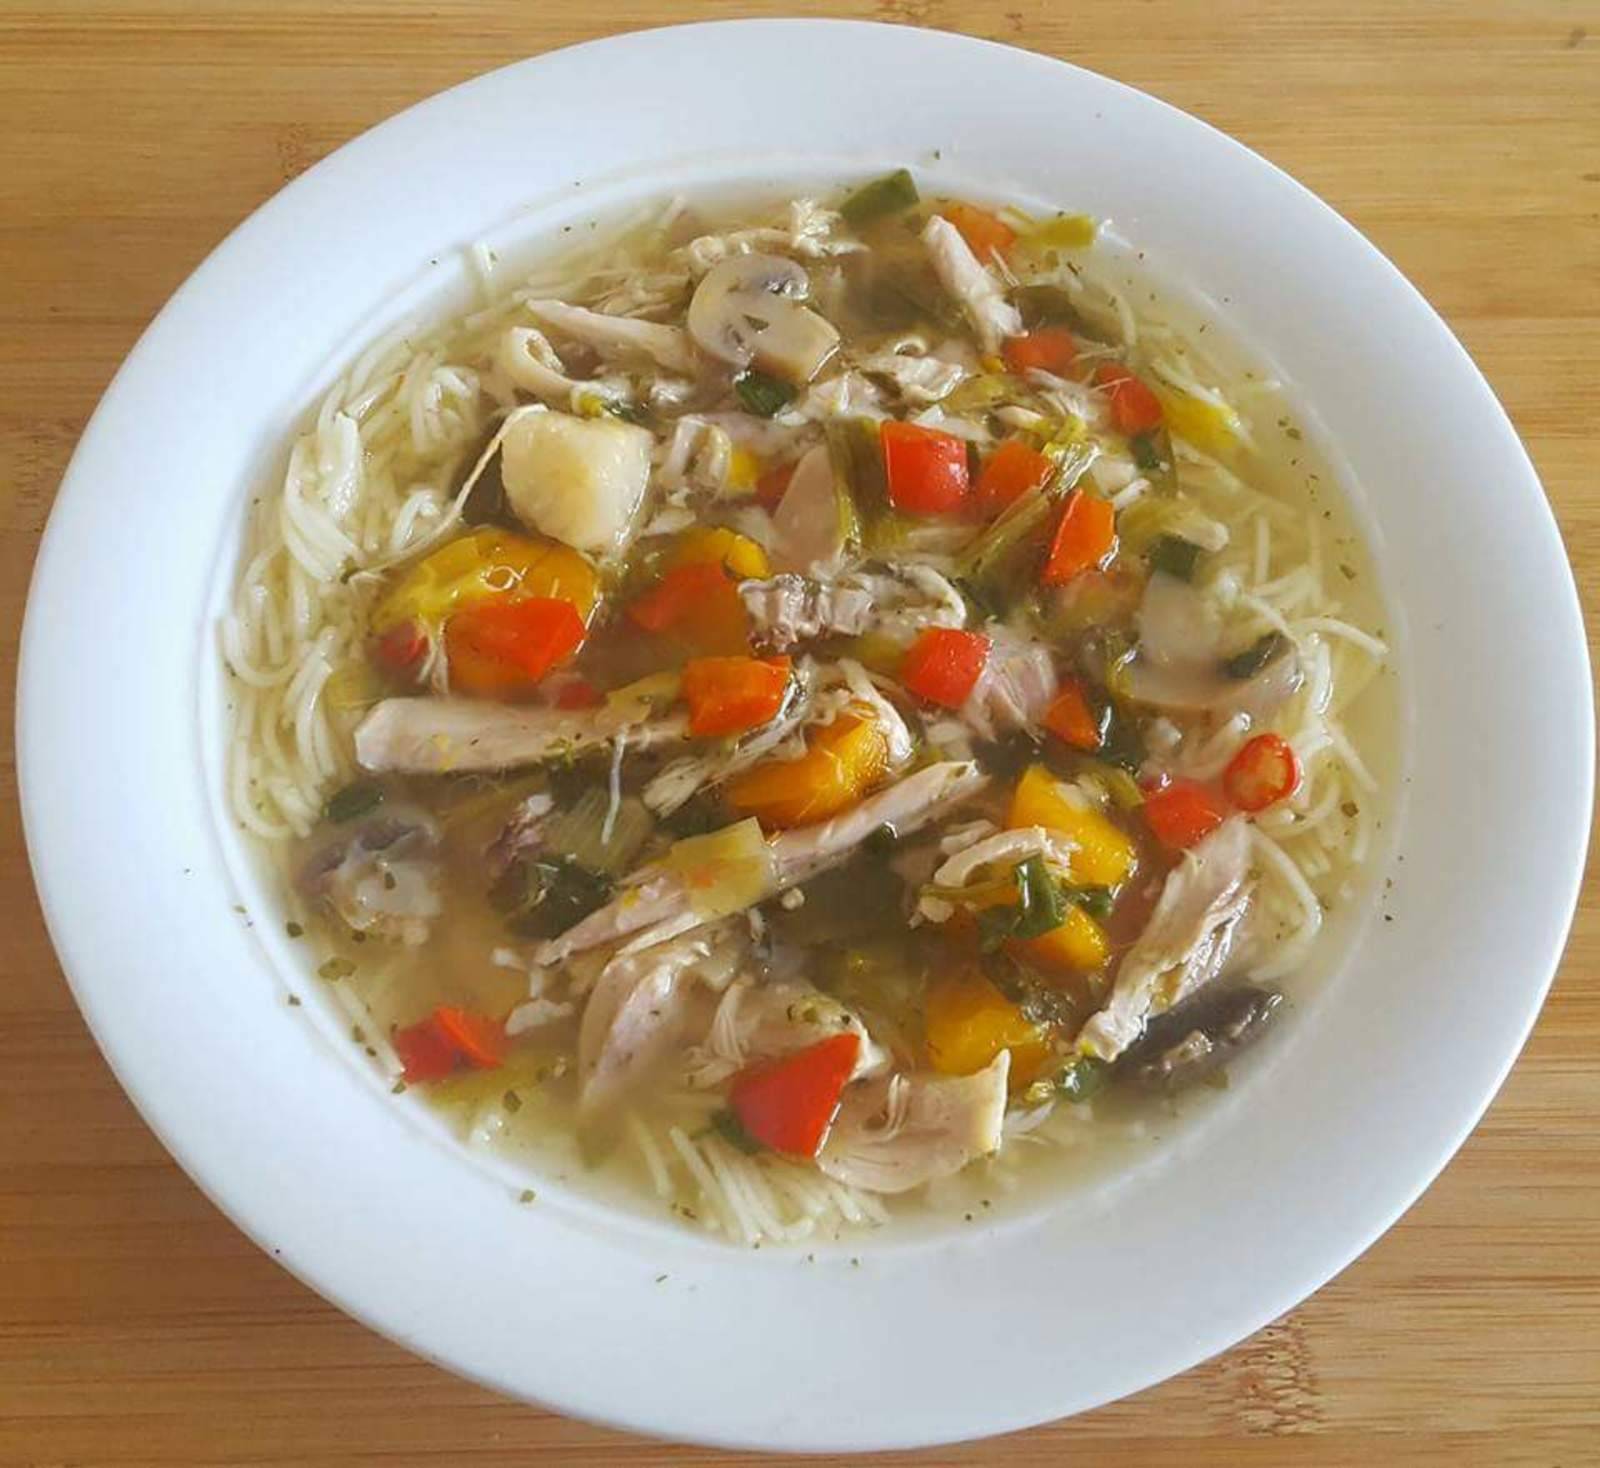 Hühner-Suppe